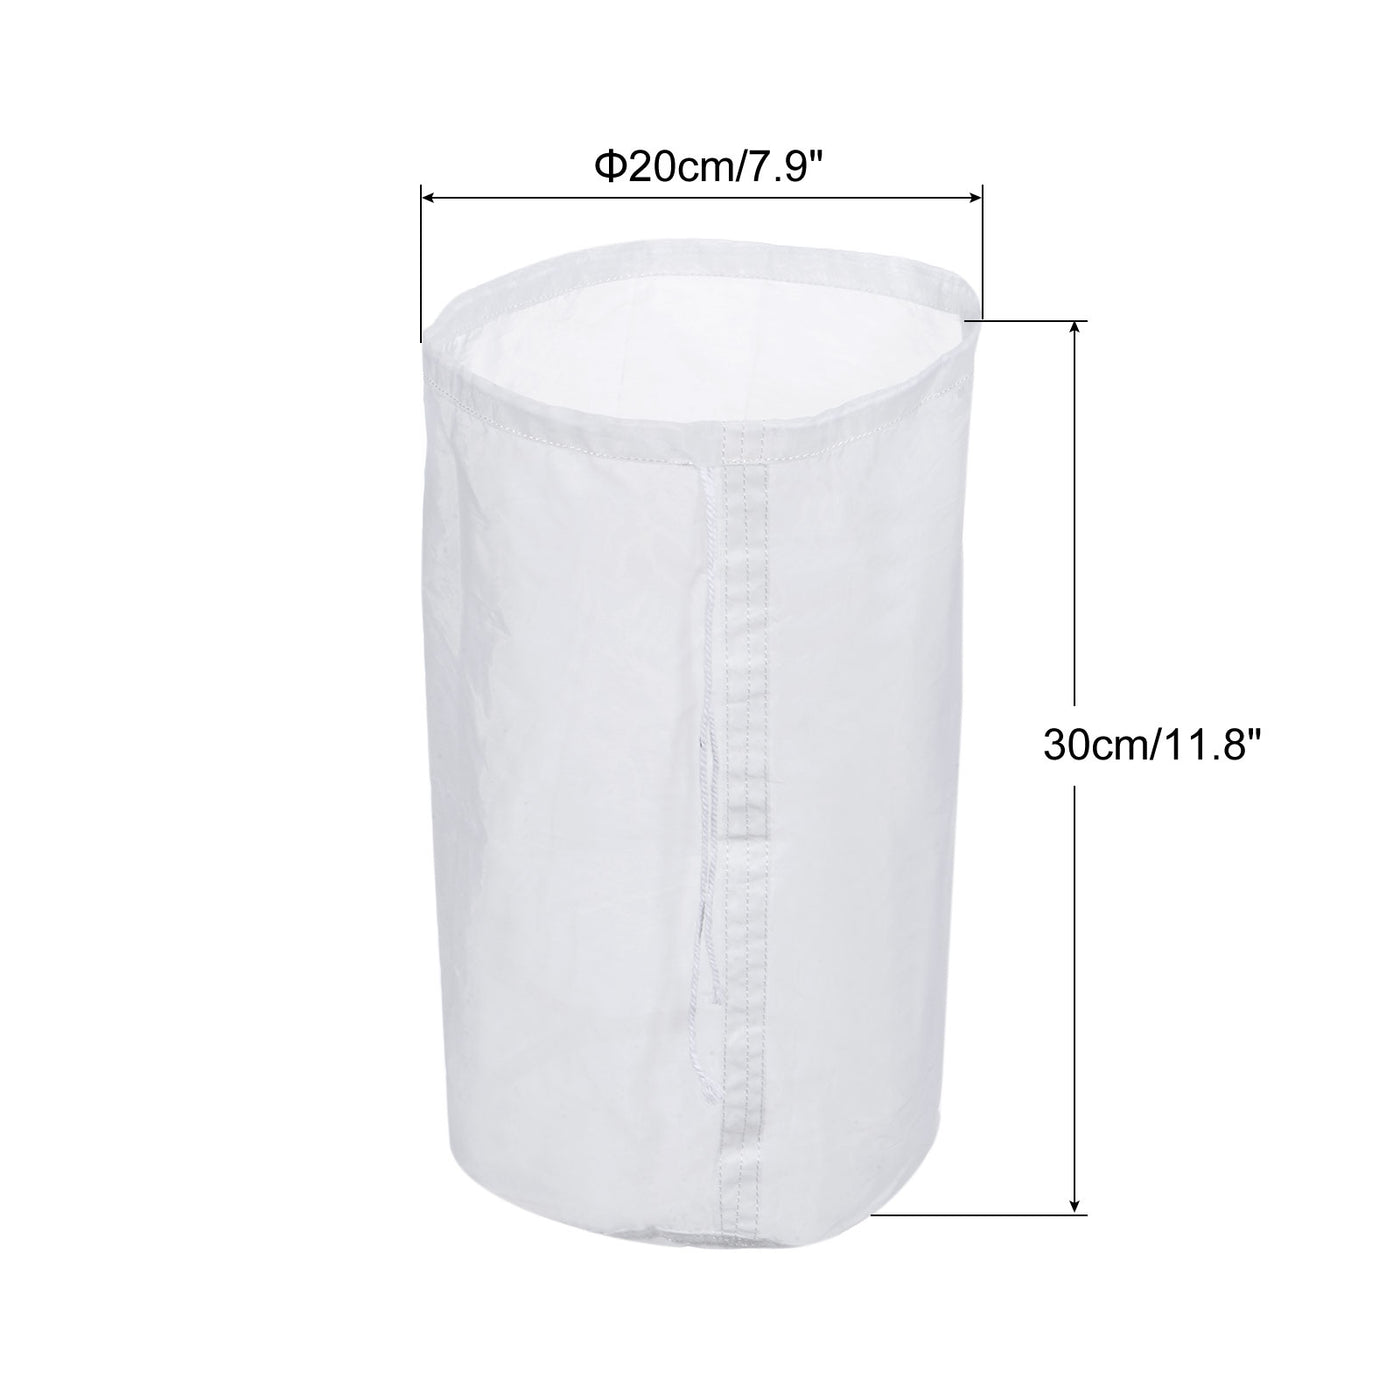 uxcell Uxcell 120 Mesh Paint Filter Bag 7.9" Dia Nylon Strainer with Drawstring for Filtering